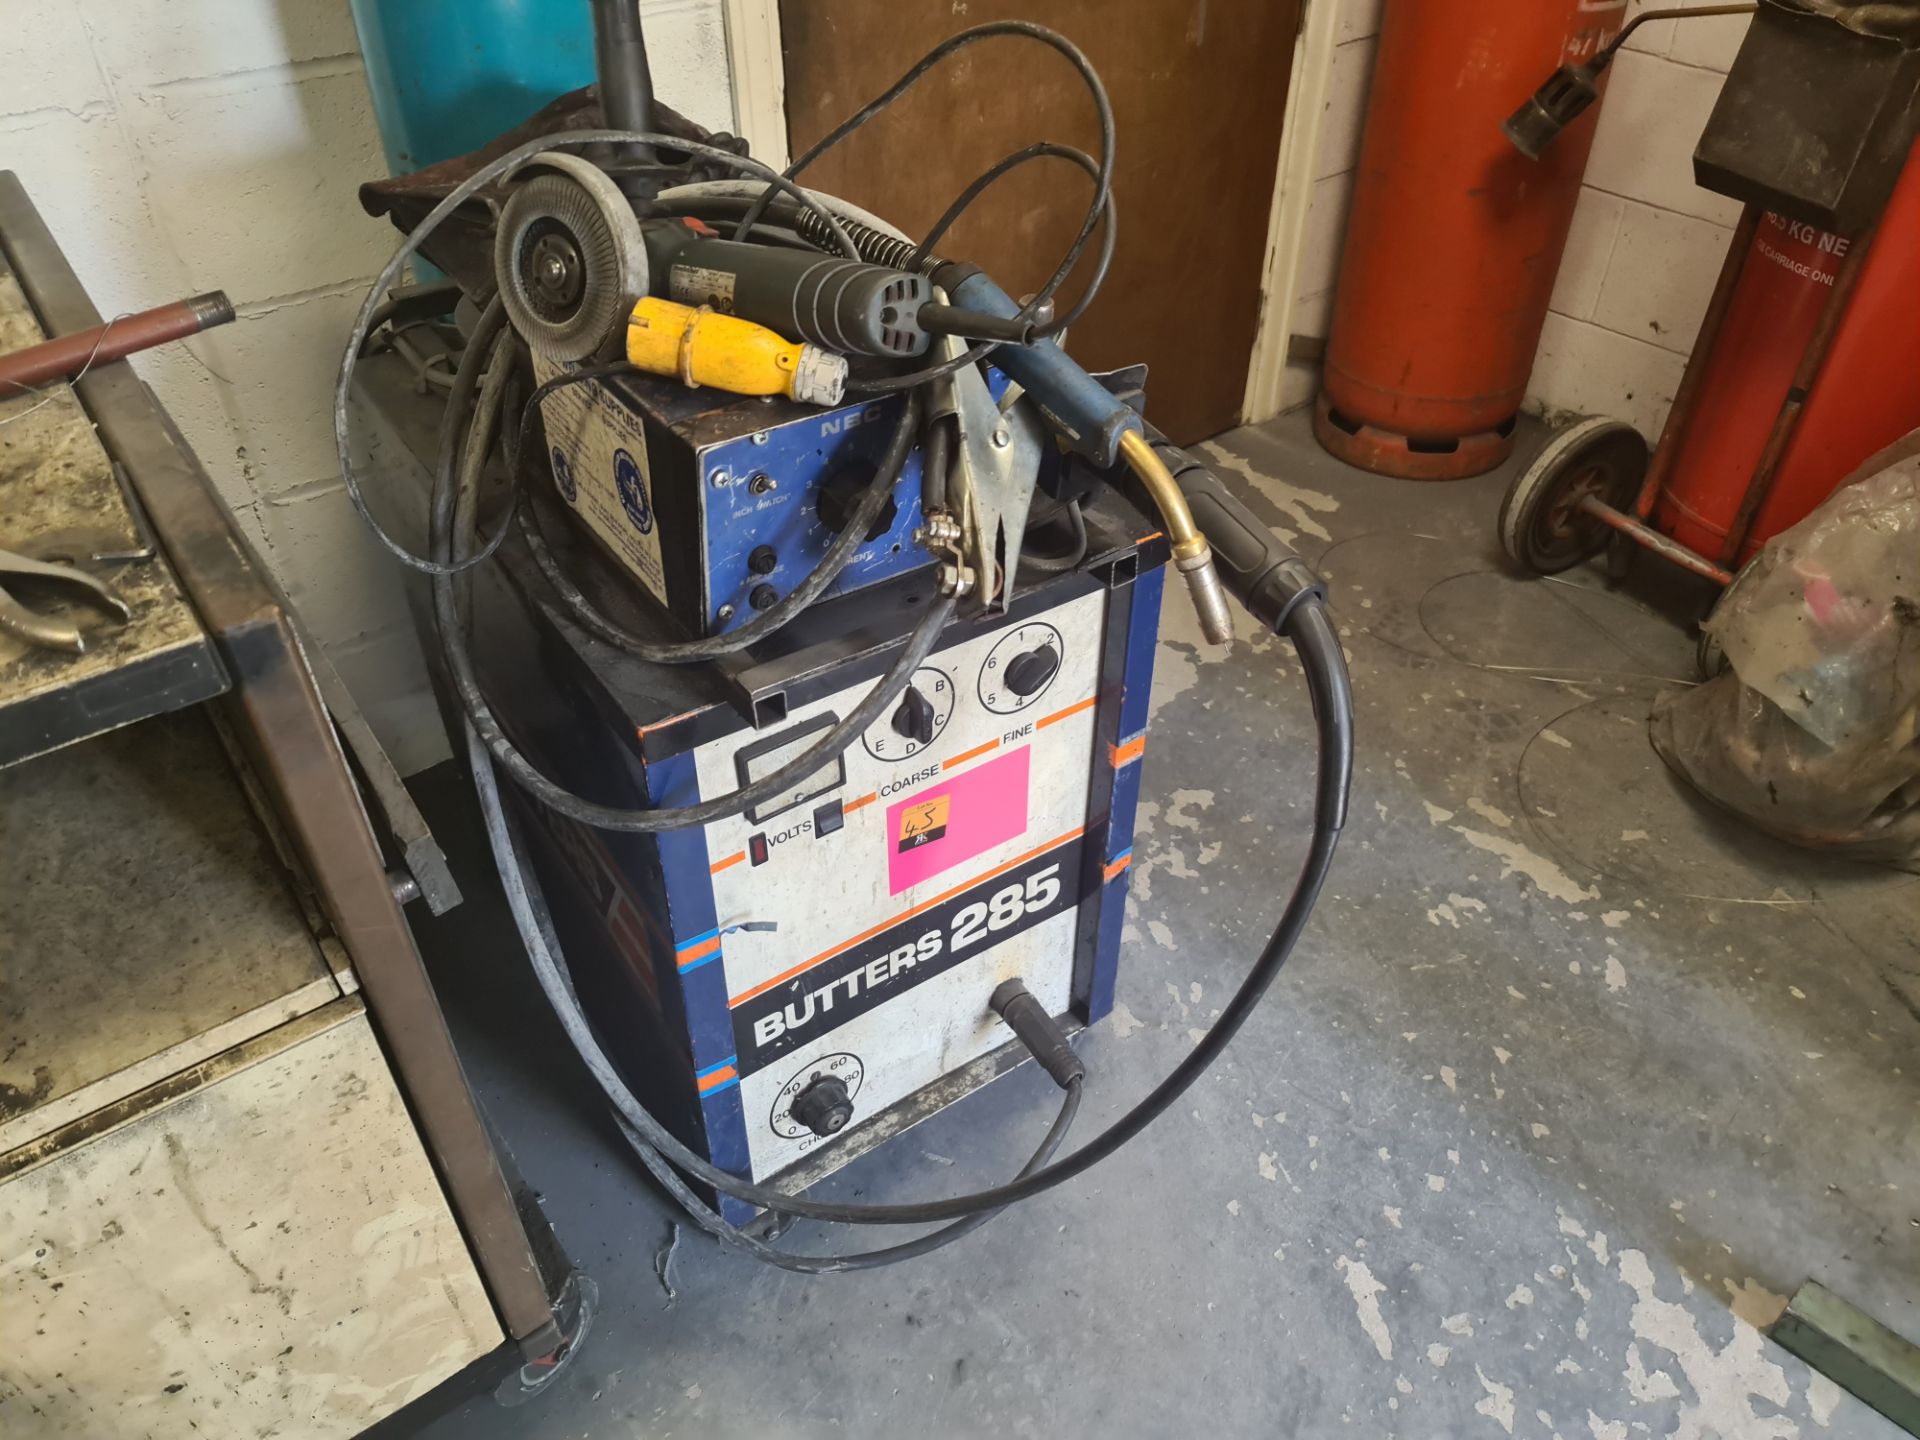 Butters 285 welding set including NBC wire feed & ancillaries as pictured. This lot includes the tr - Image 19 of 19